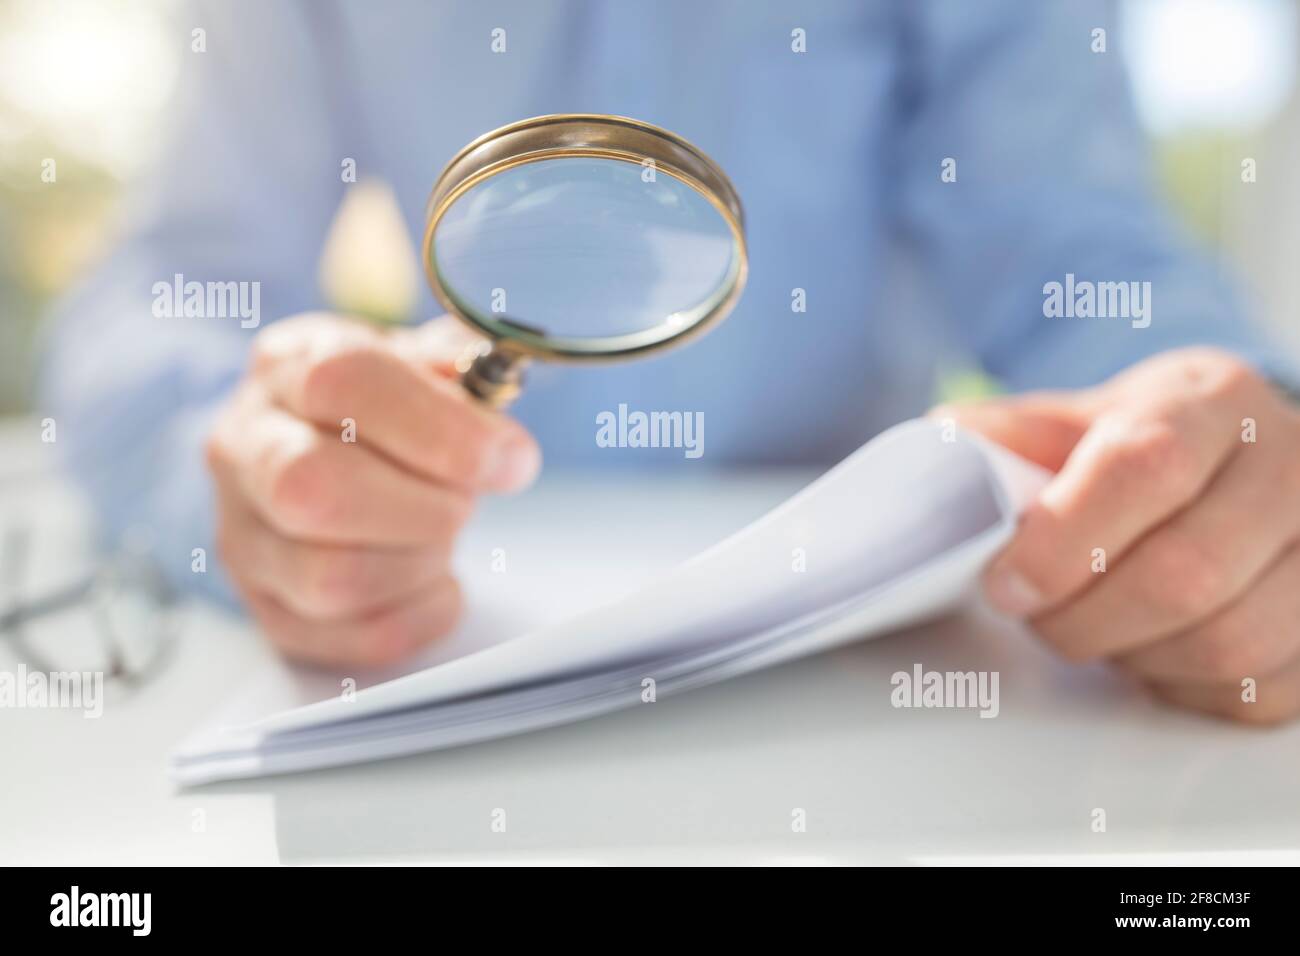 Businessman reading documents with magnifying glass concept for analyzing a finance agreement or legal contract Stock Photo